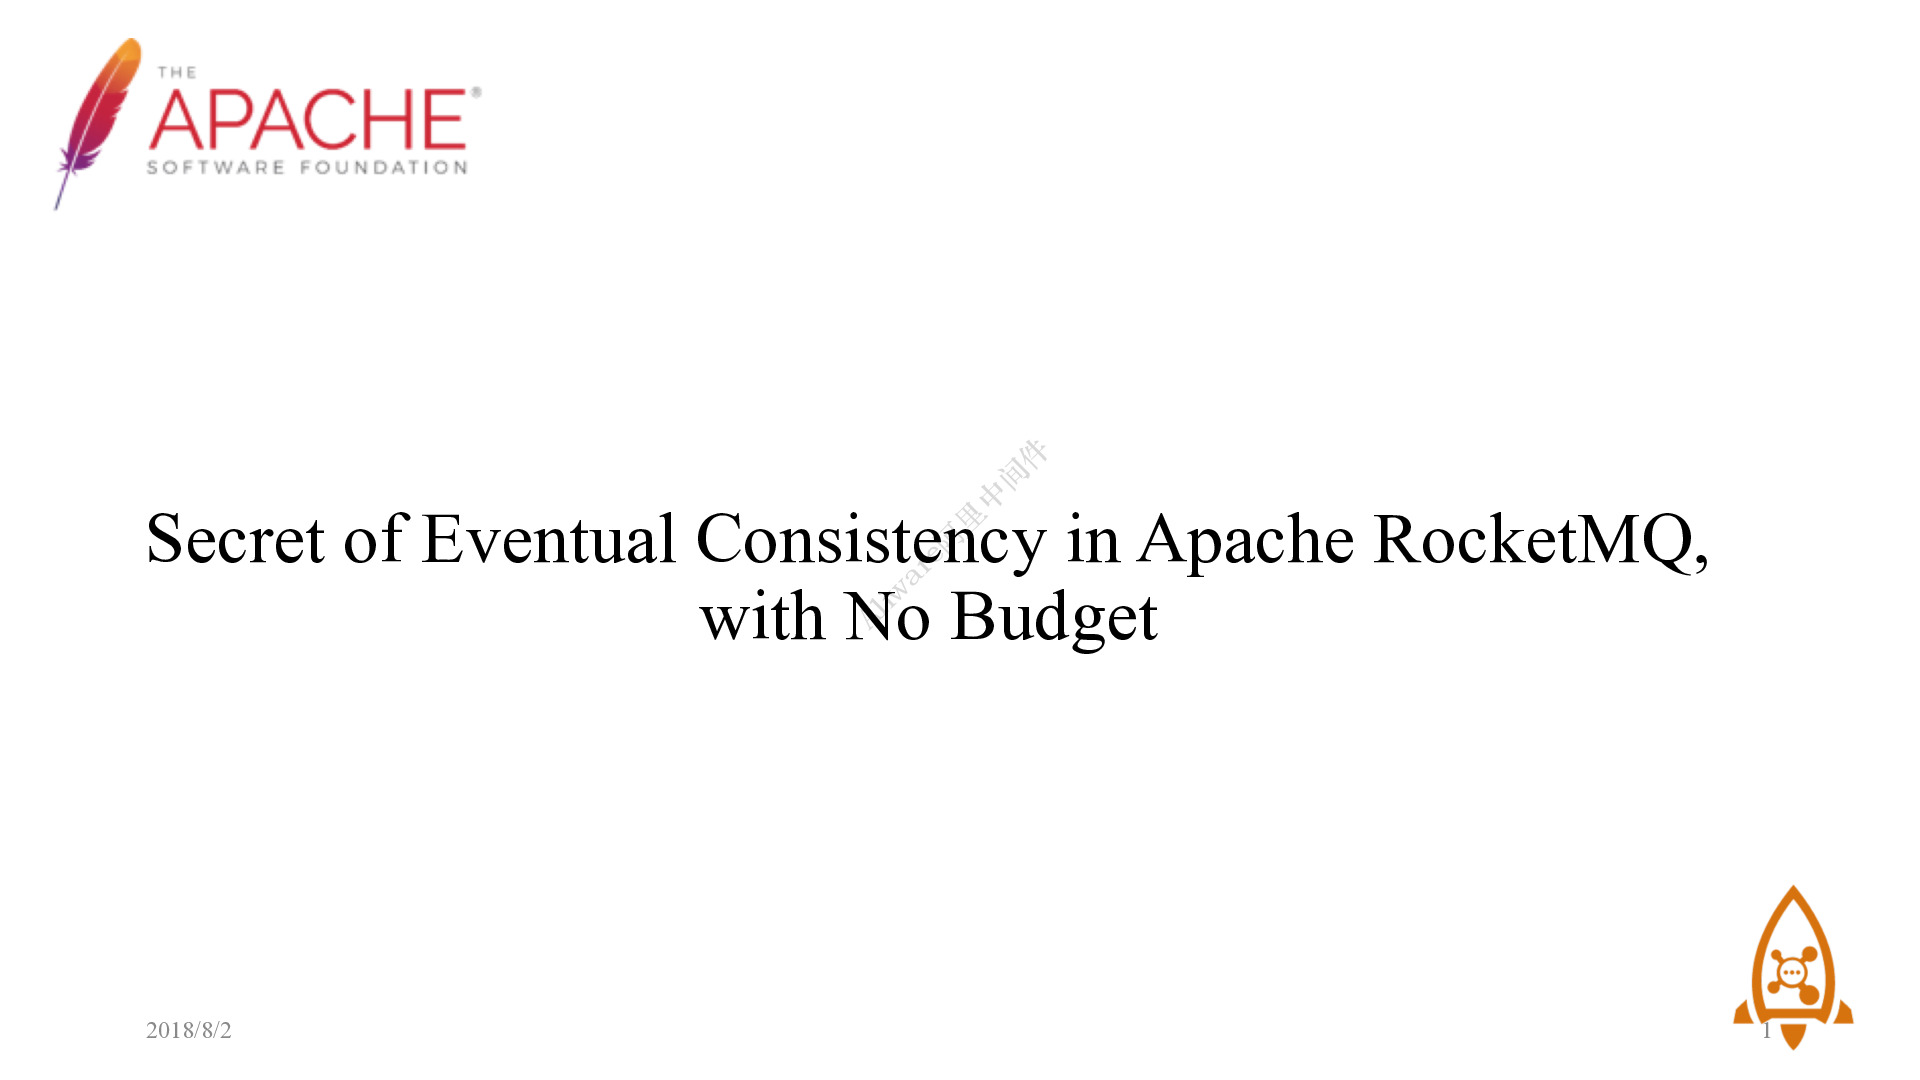 Aliware_Open_Source_深圳站_PPT_阿里巴巴杜恒_Secret_of_Eventual_Consistency_in_Apache_RocketMQ_with_No_Budget